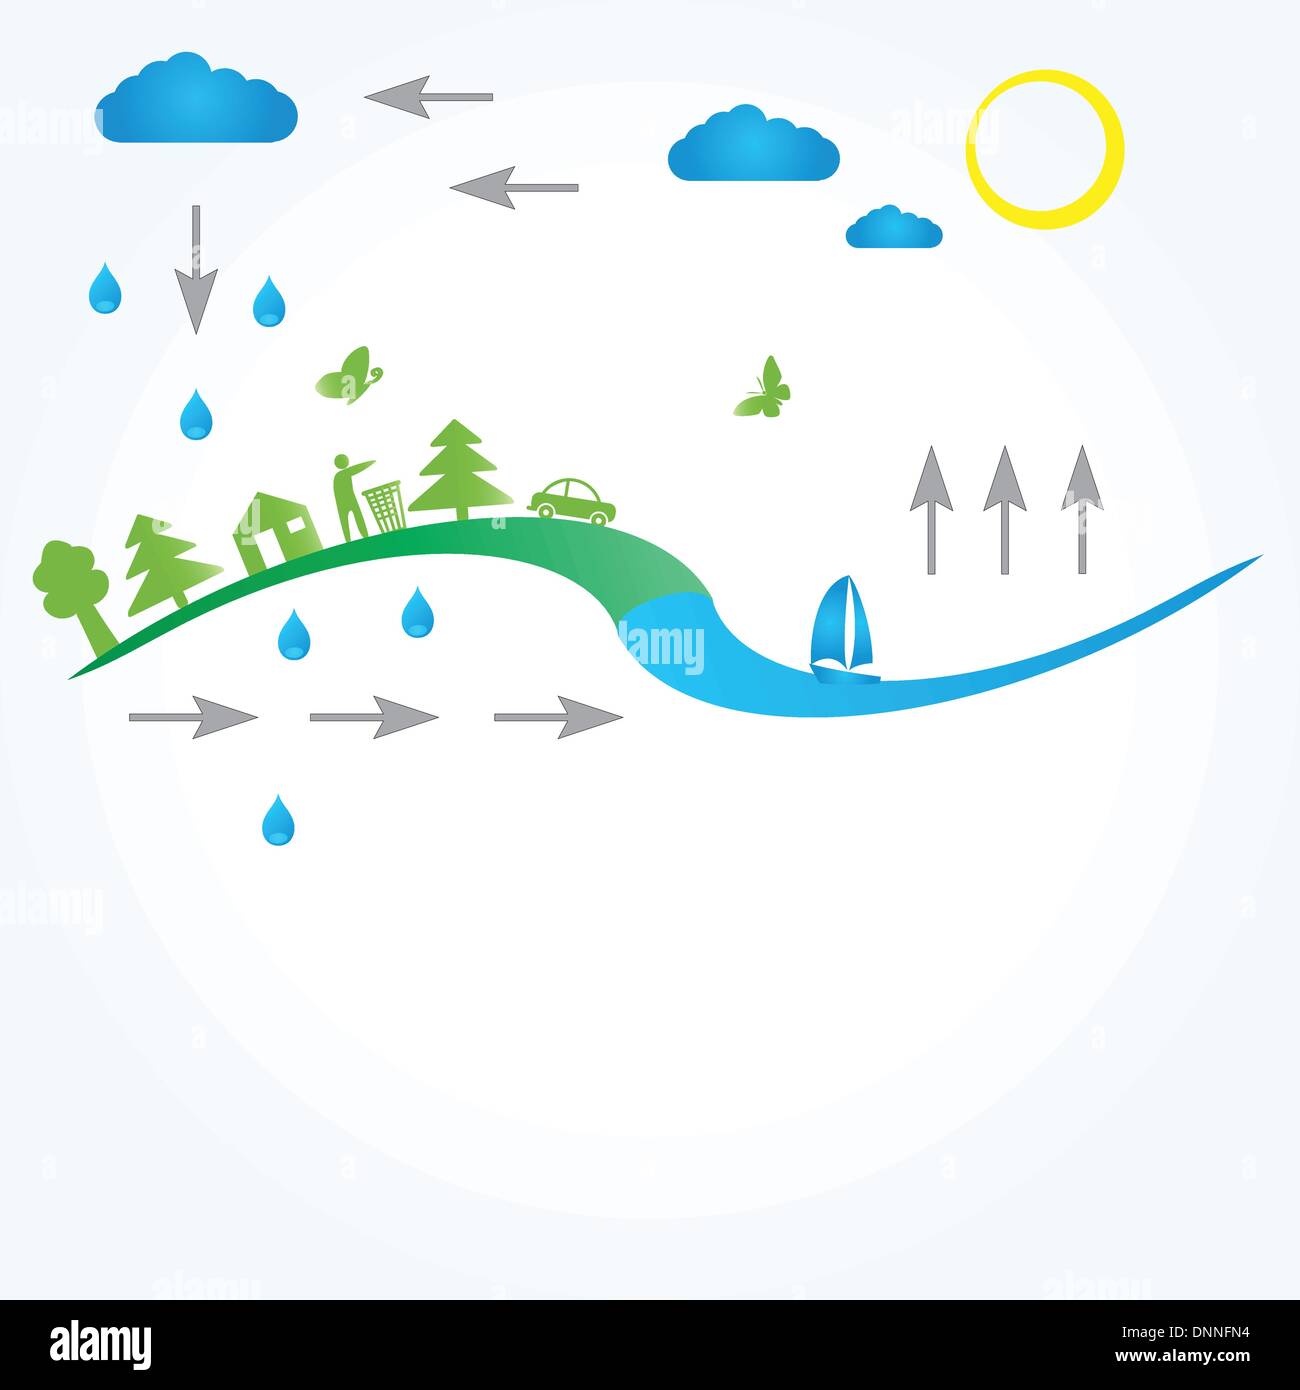 Water circulation in nature, concept background Stock Vector